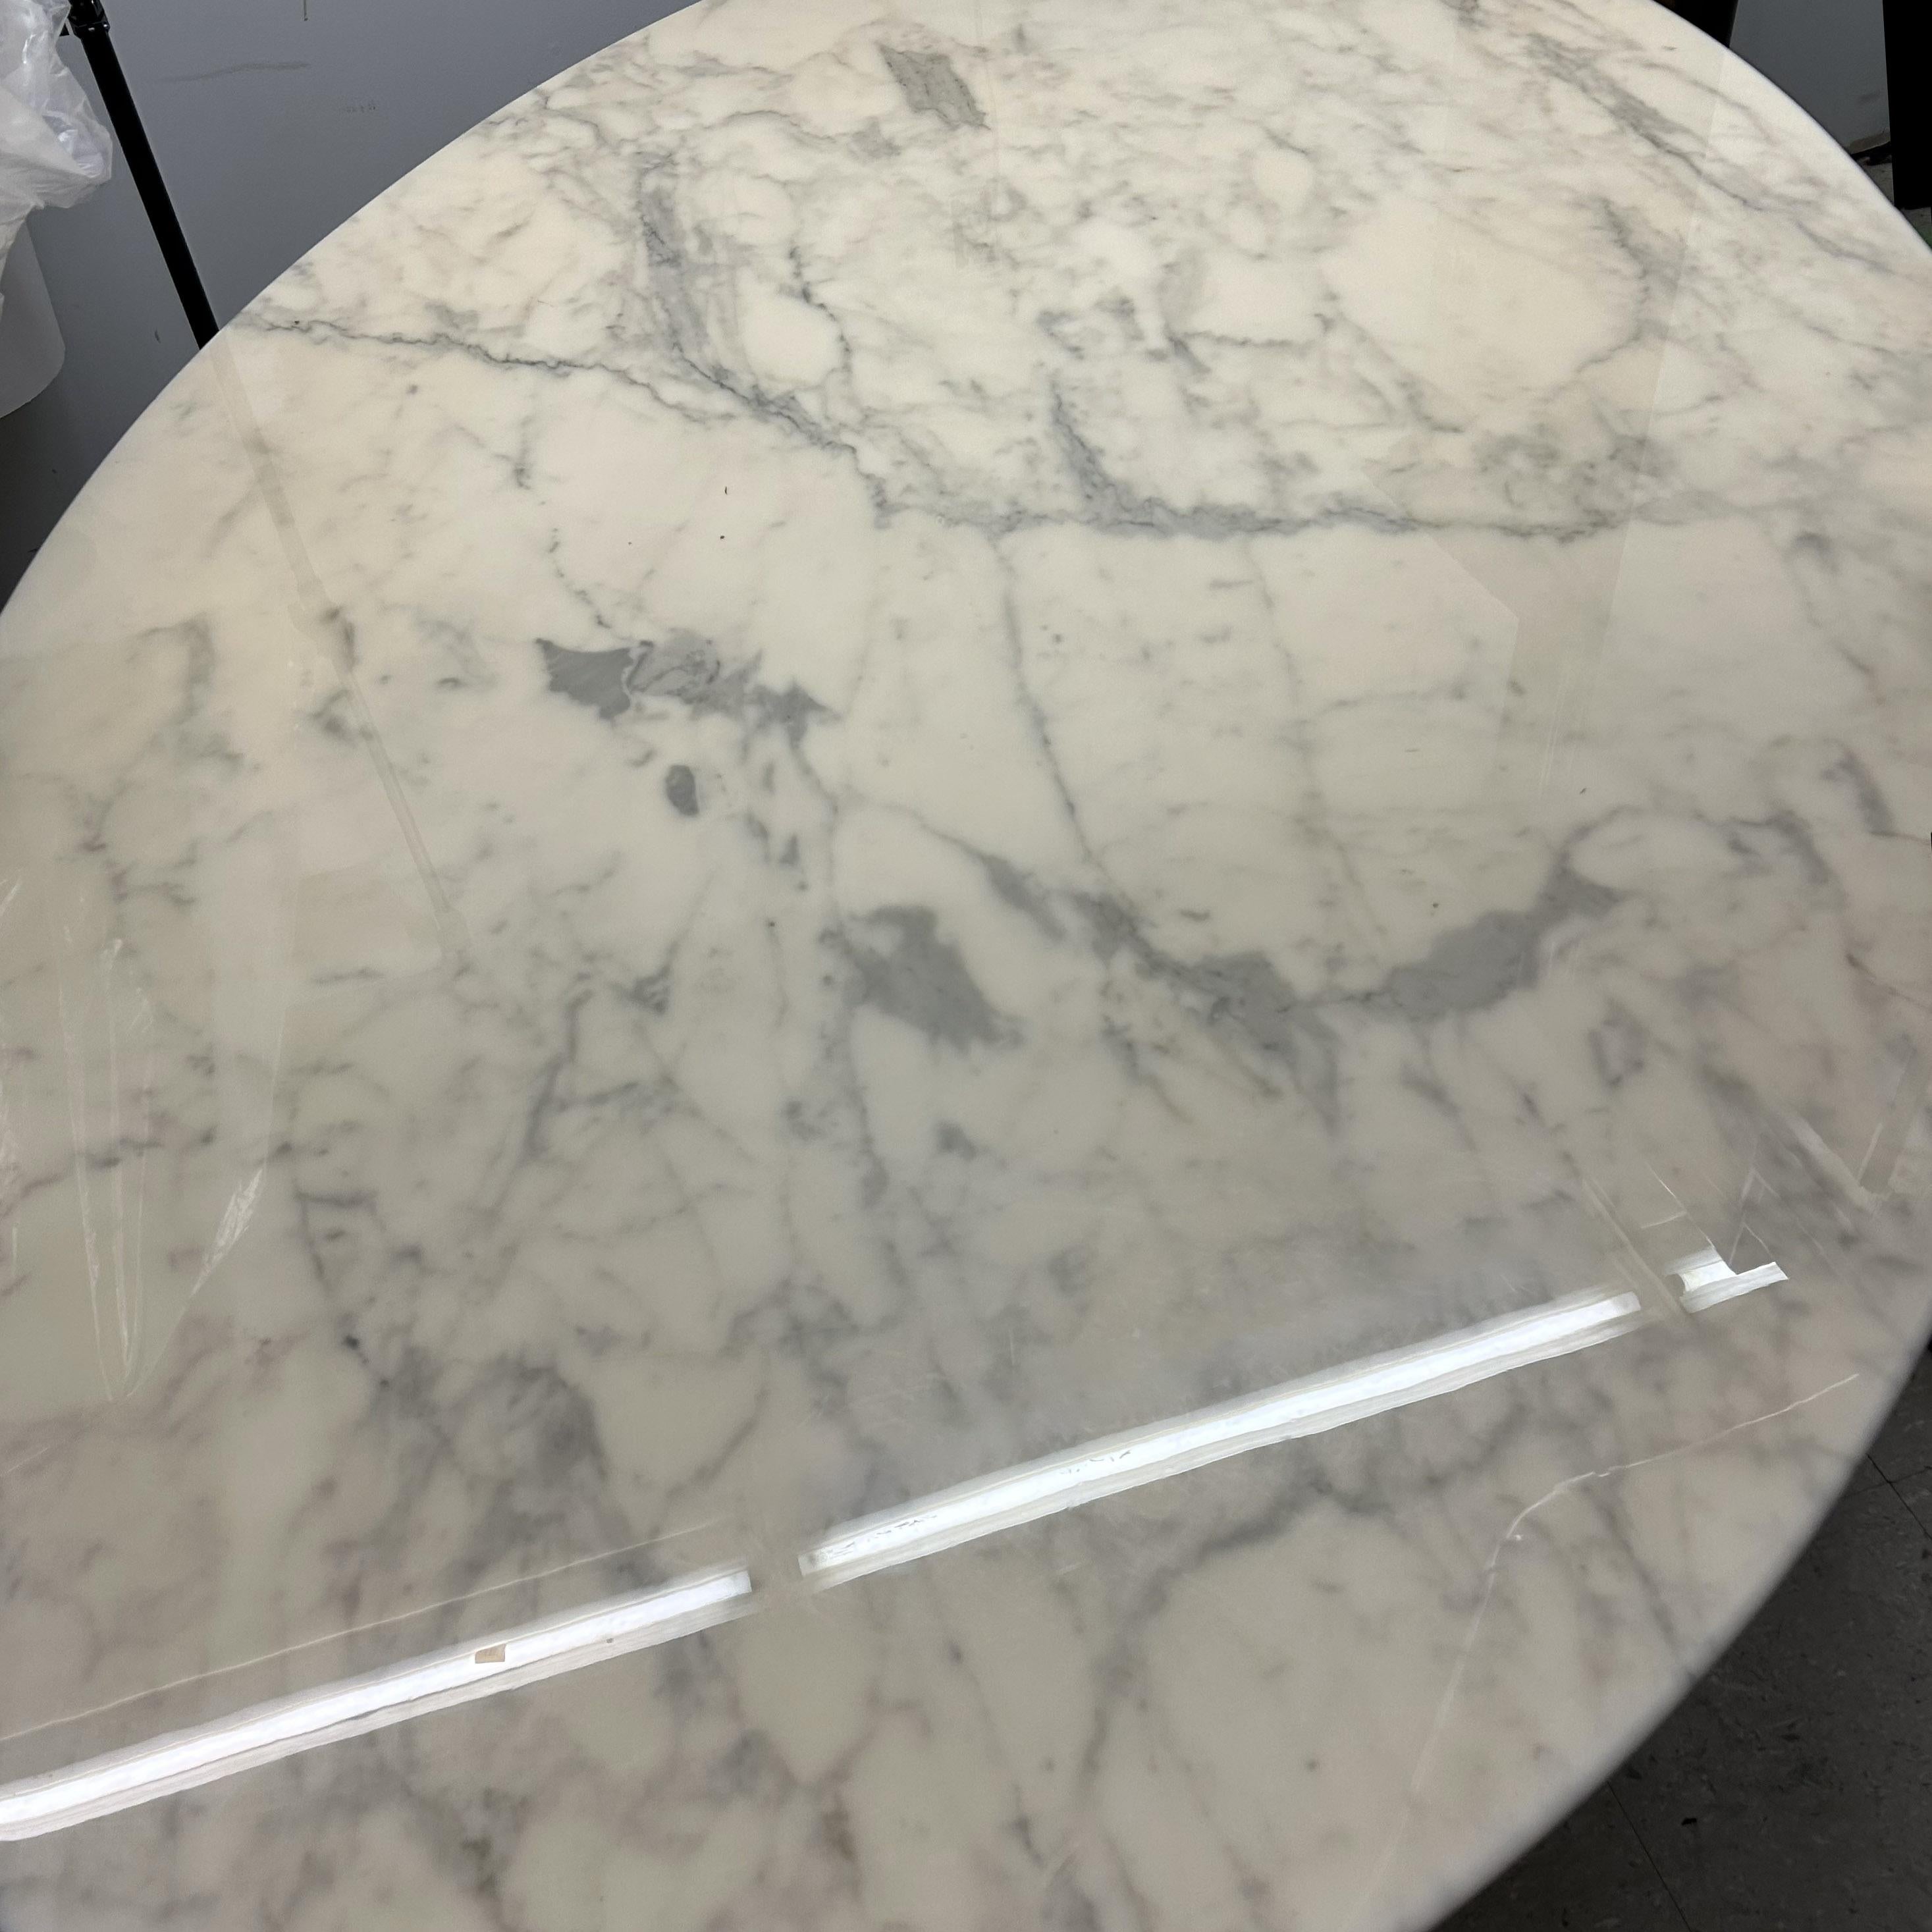 Florence Knoll's Classic Mid-Century Modern oval dining table with marble top was designed and produced in the 1960s. This luxurious marble table top features a beautiful cool gray veining throughout and is set on a heavy gauge chromed steel base